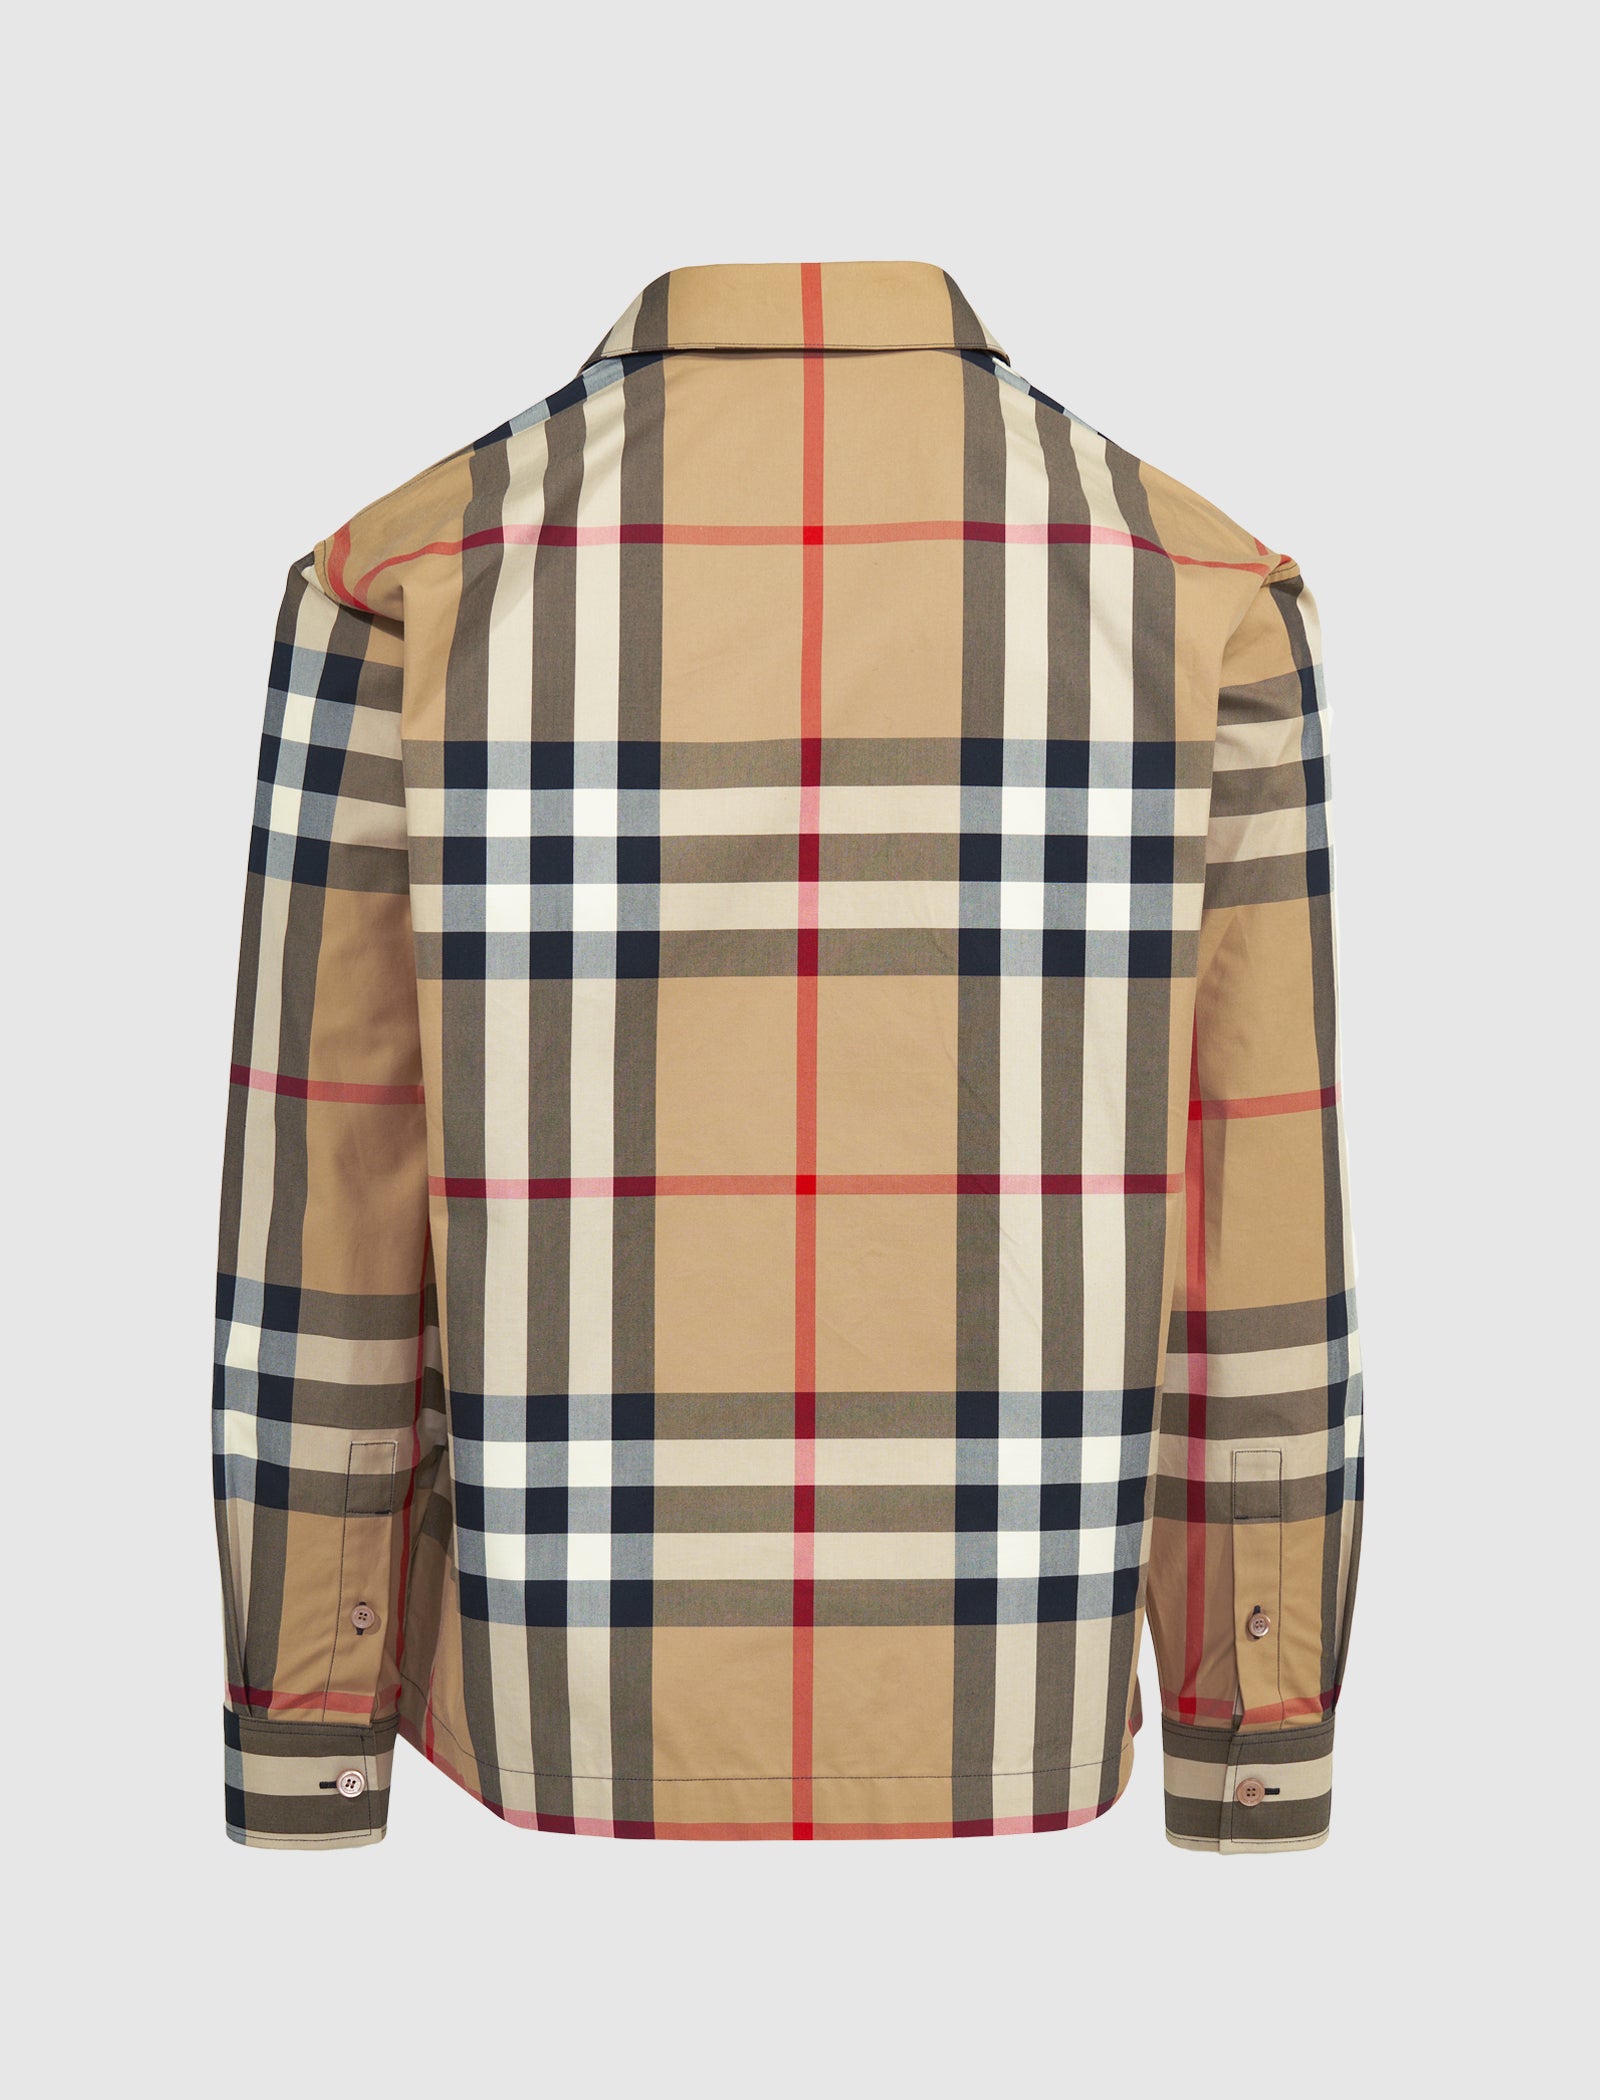 BURBERRY WILLMOORE SHIRT – A Ma Maniere